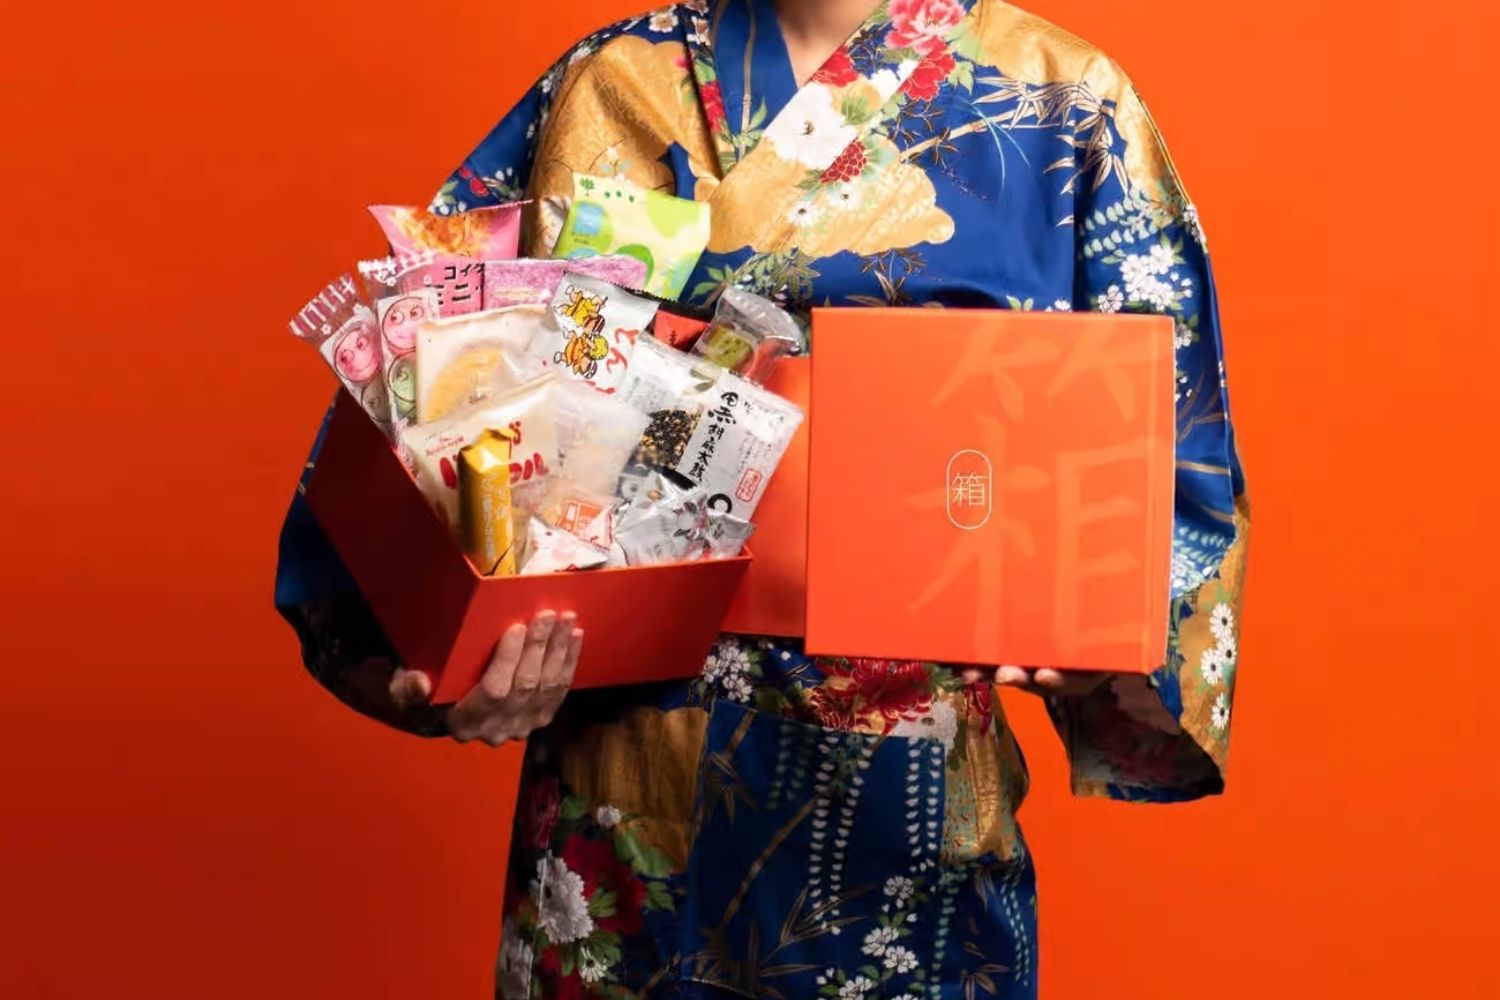 The Best Subscription Gifts Options: Bokksu Japanese Snack Subscription